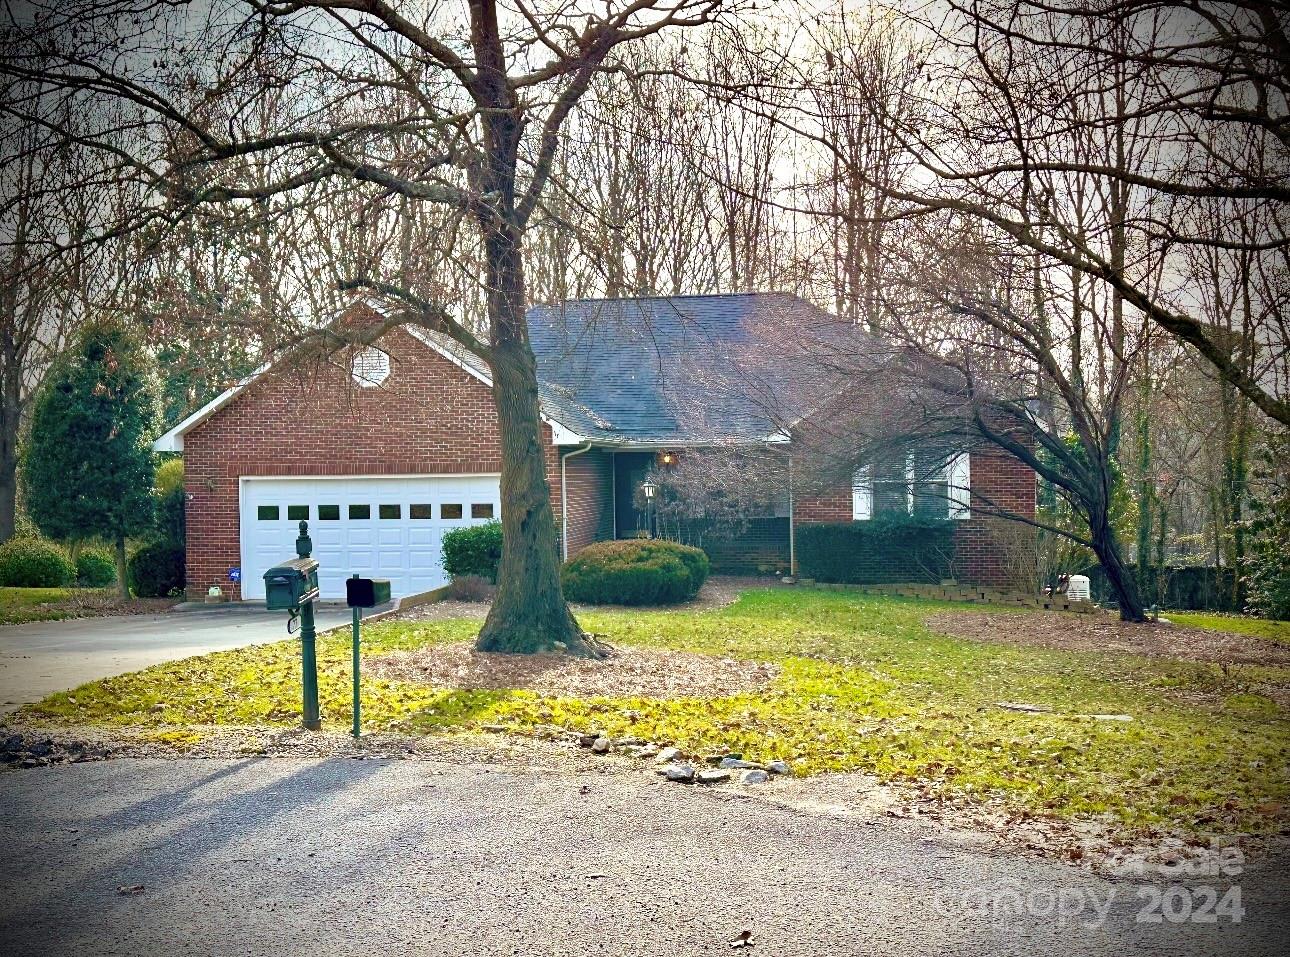 a front view of a house with yard and garage